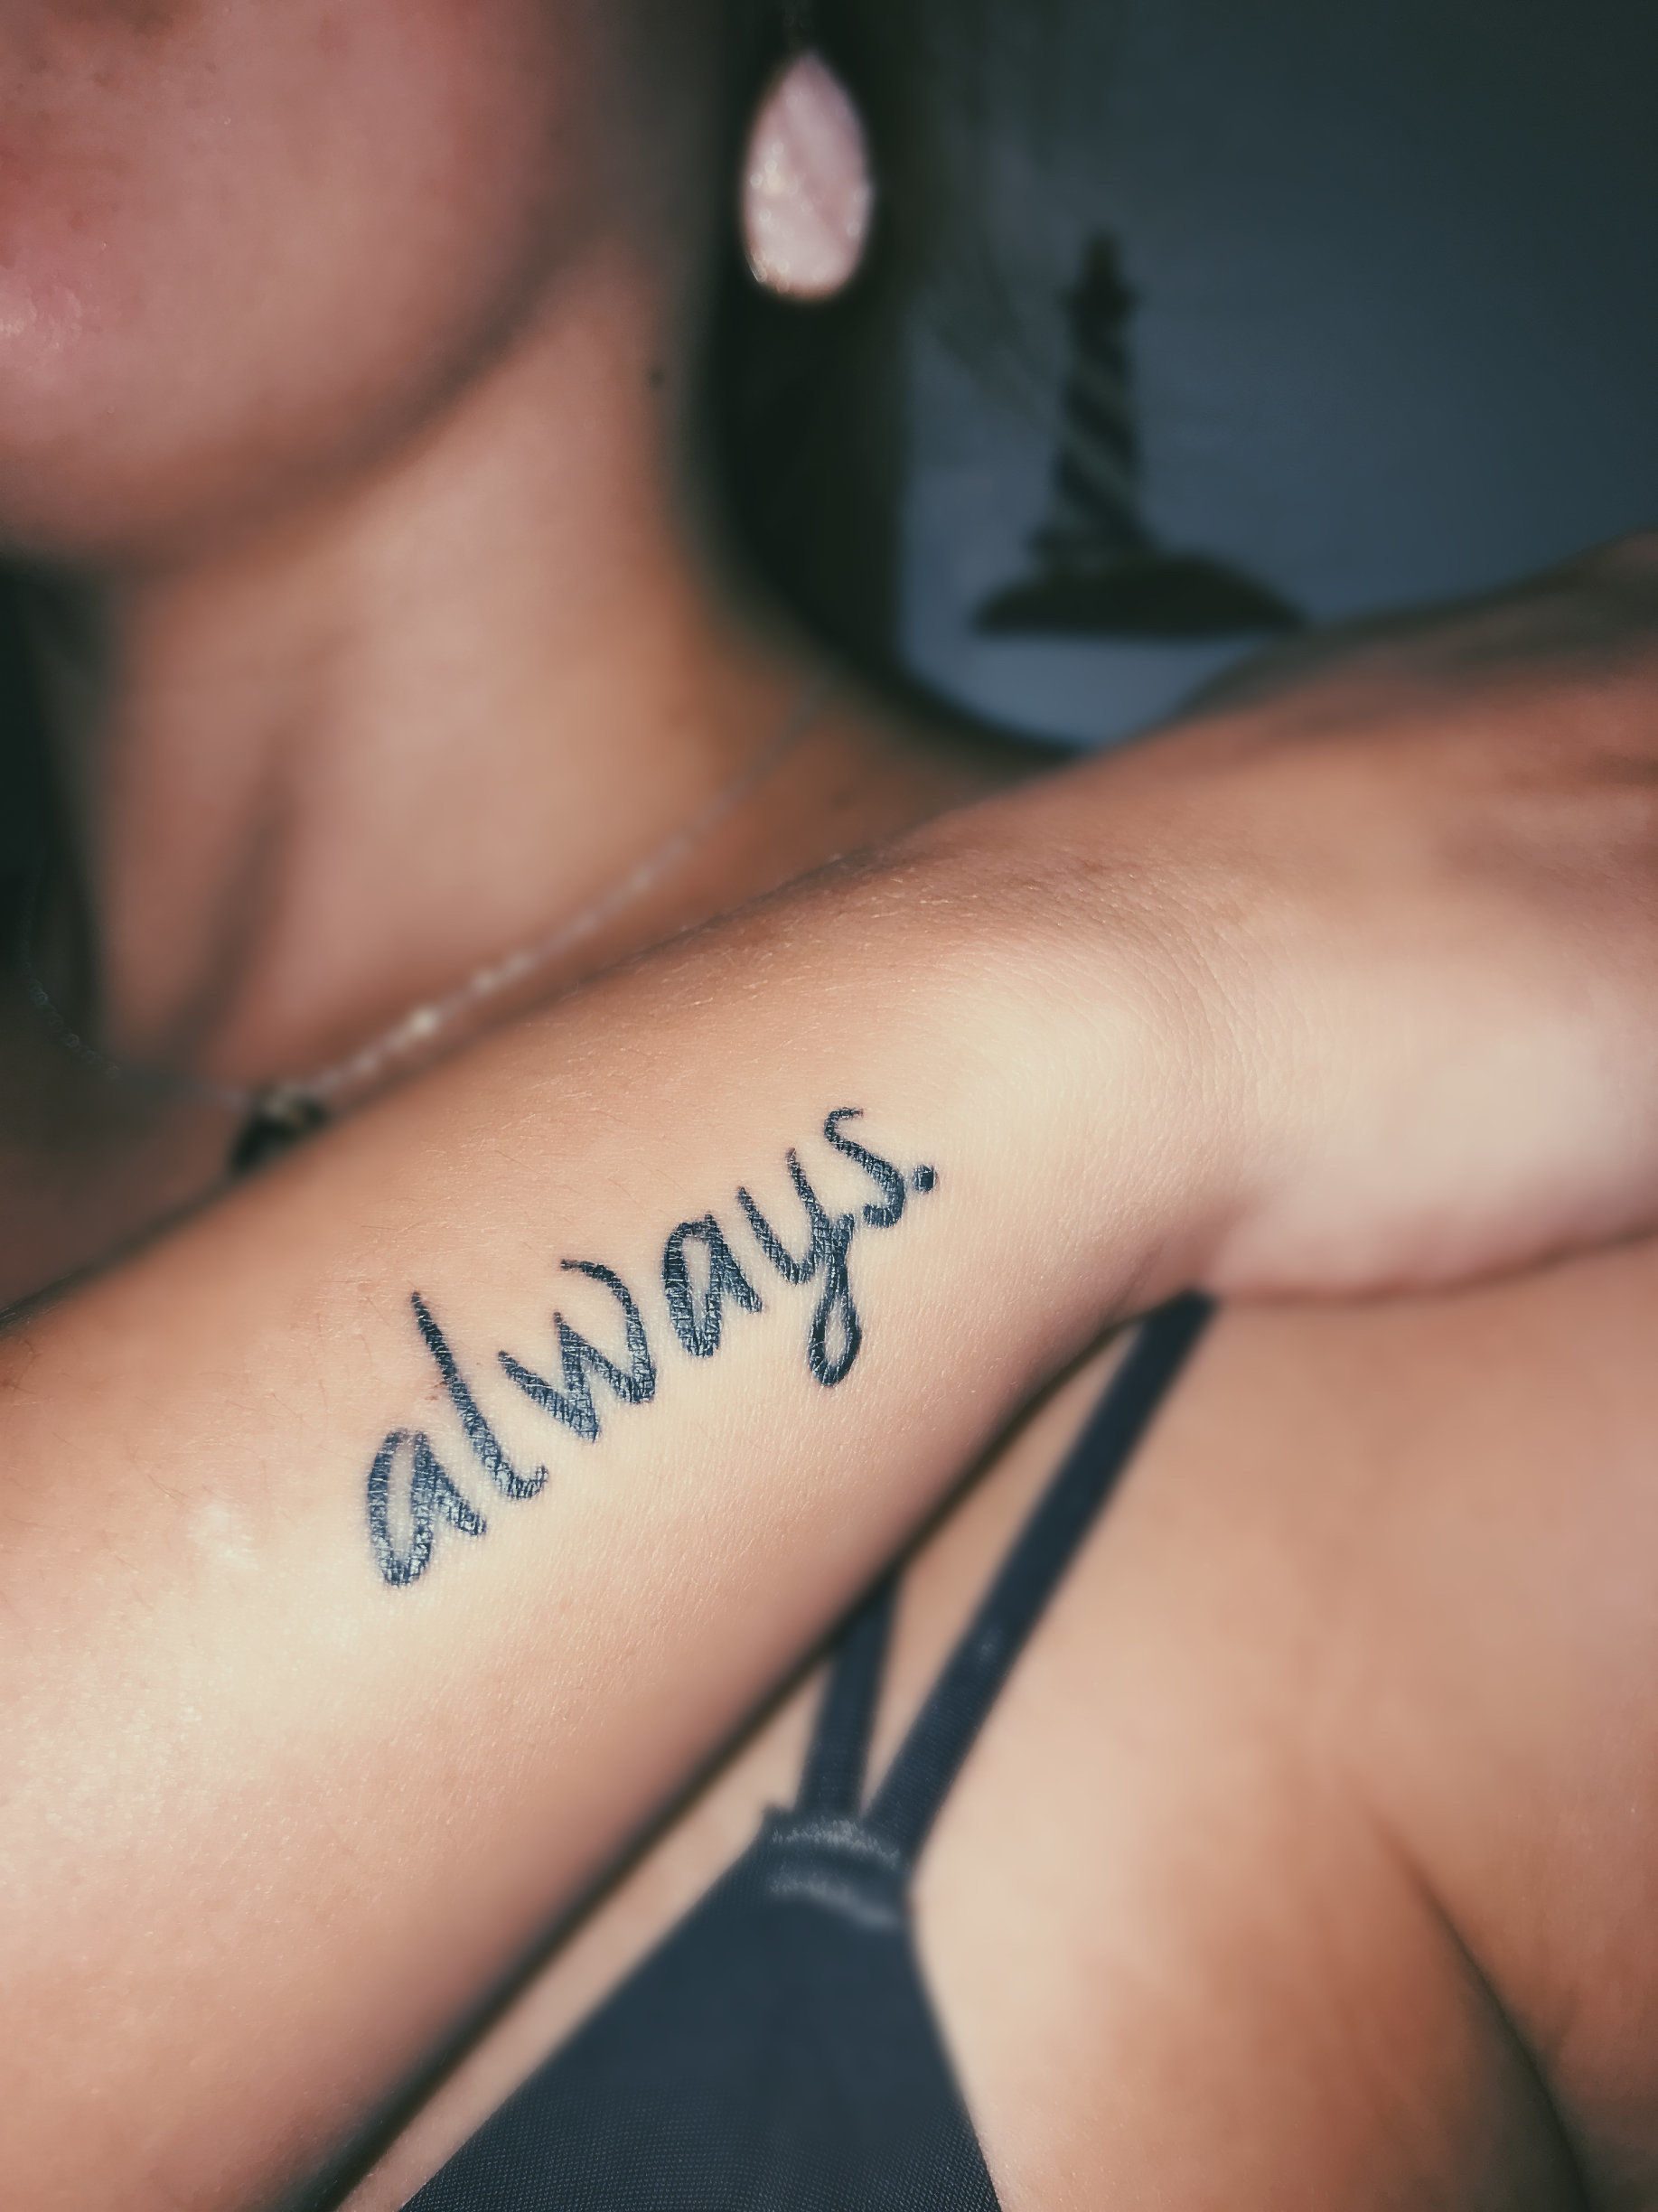 Shynanegans Tattoo - “Always- refers to the fact that Severus Snape always  loved Lily Potter (kahit di sya yung piniling makatuluyan 😭)“ A- Sign of  the Deathly Hollows. #shynaneganstattoo #harrypottertattoo  #minimalisttattoo | Facebook